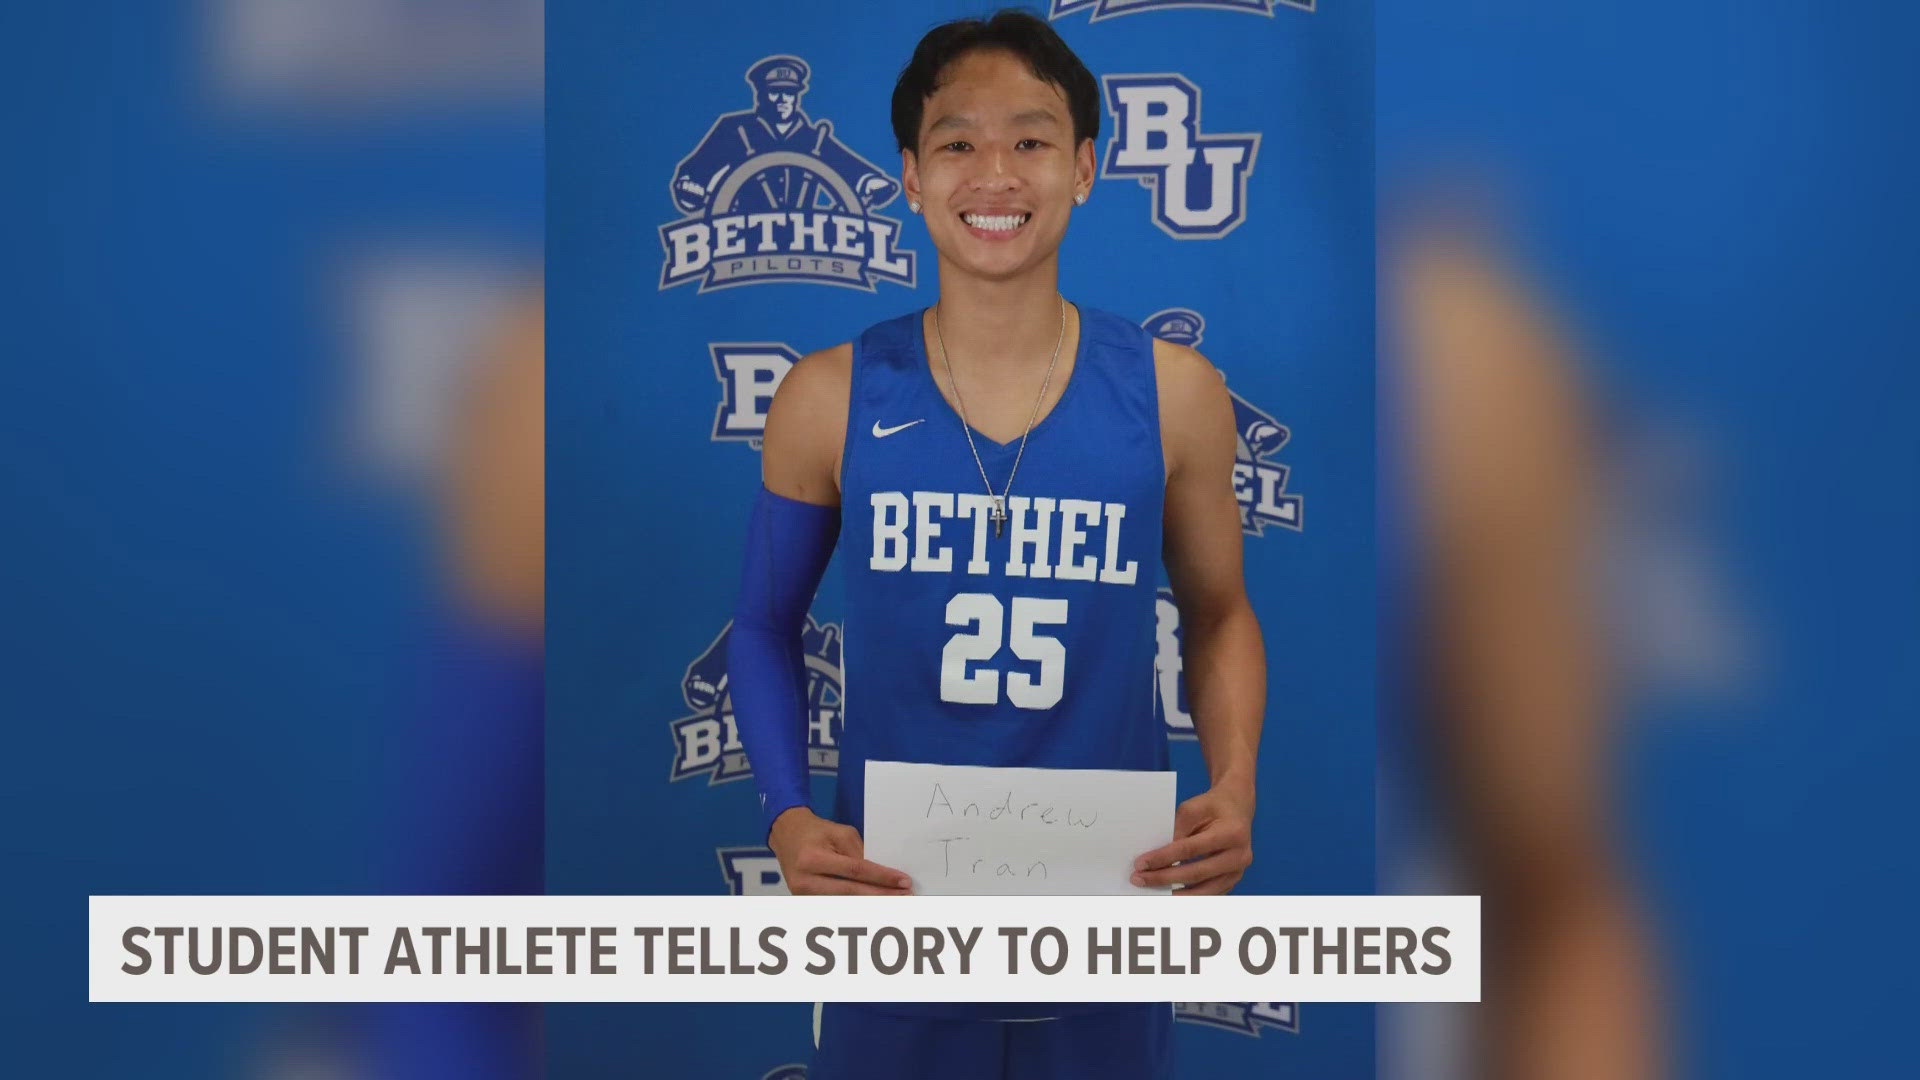 Beating cancer to continue his dreams of playing basketball, Andrew Tran reflects on what helped him see the light at the end of the tunnel.